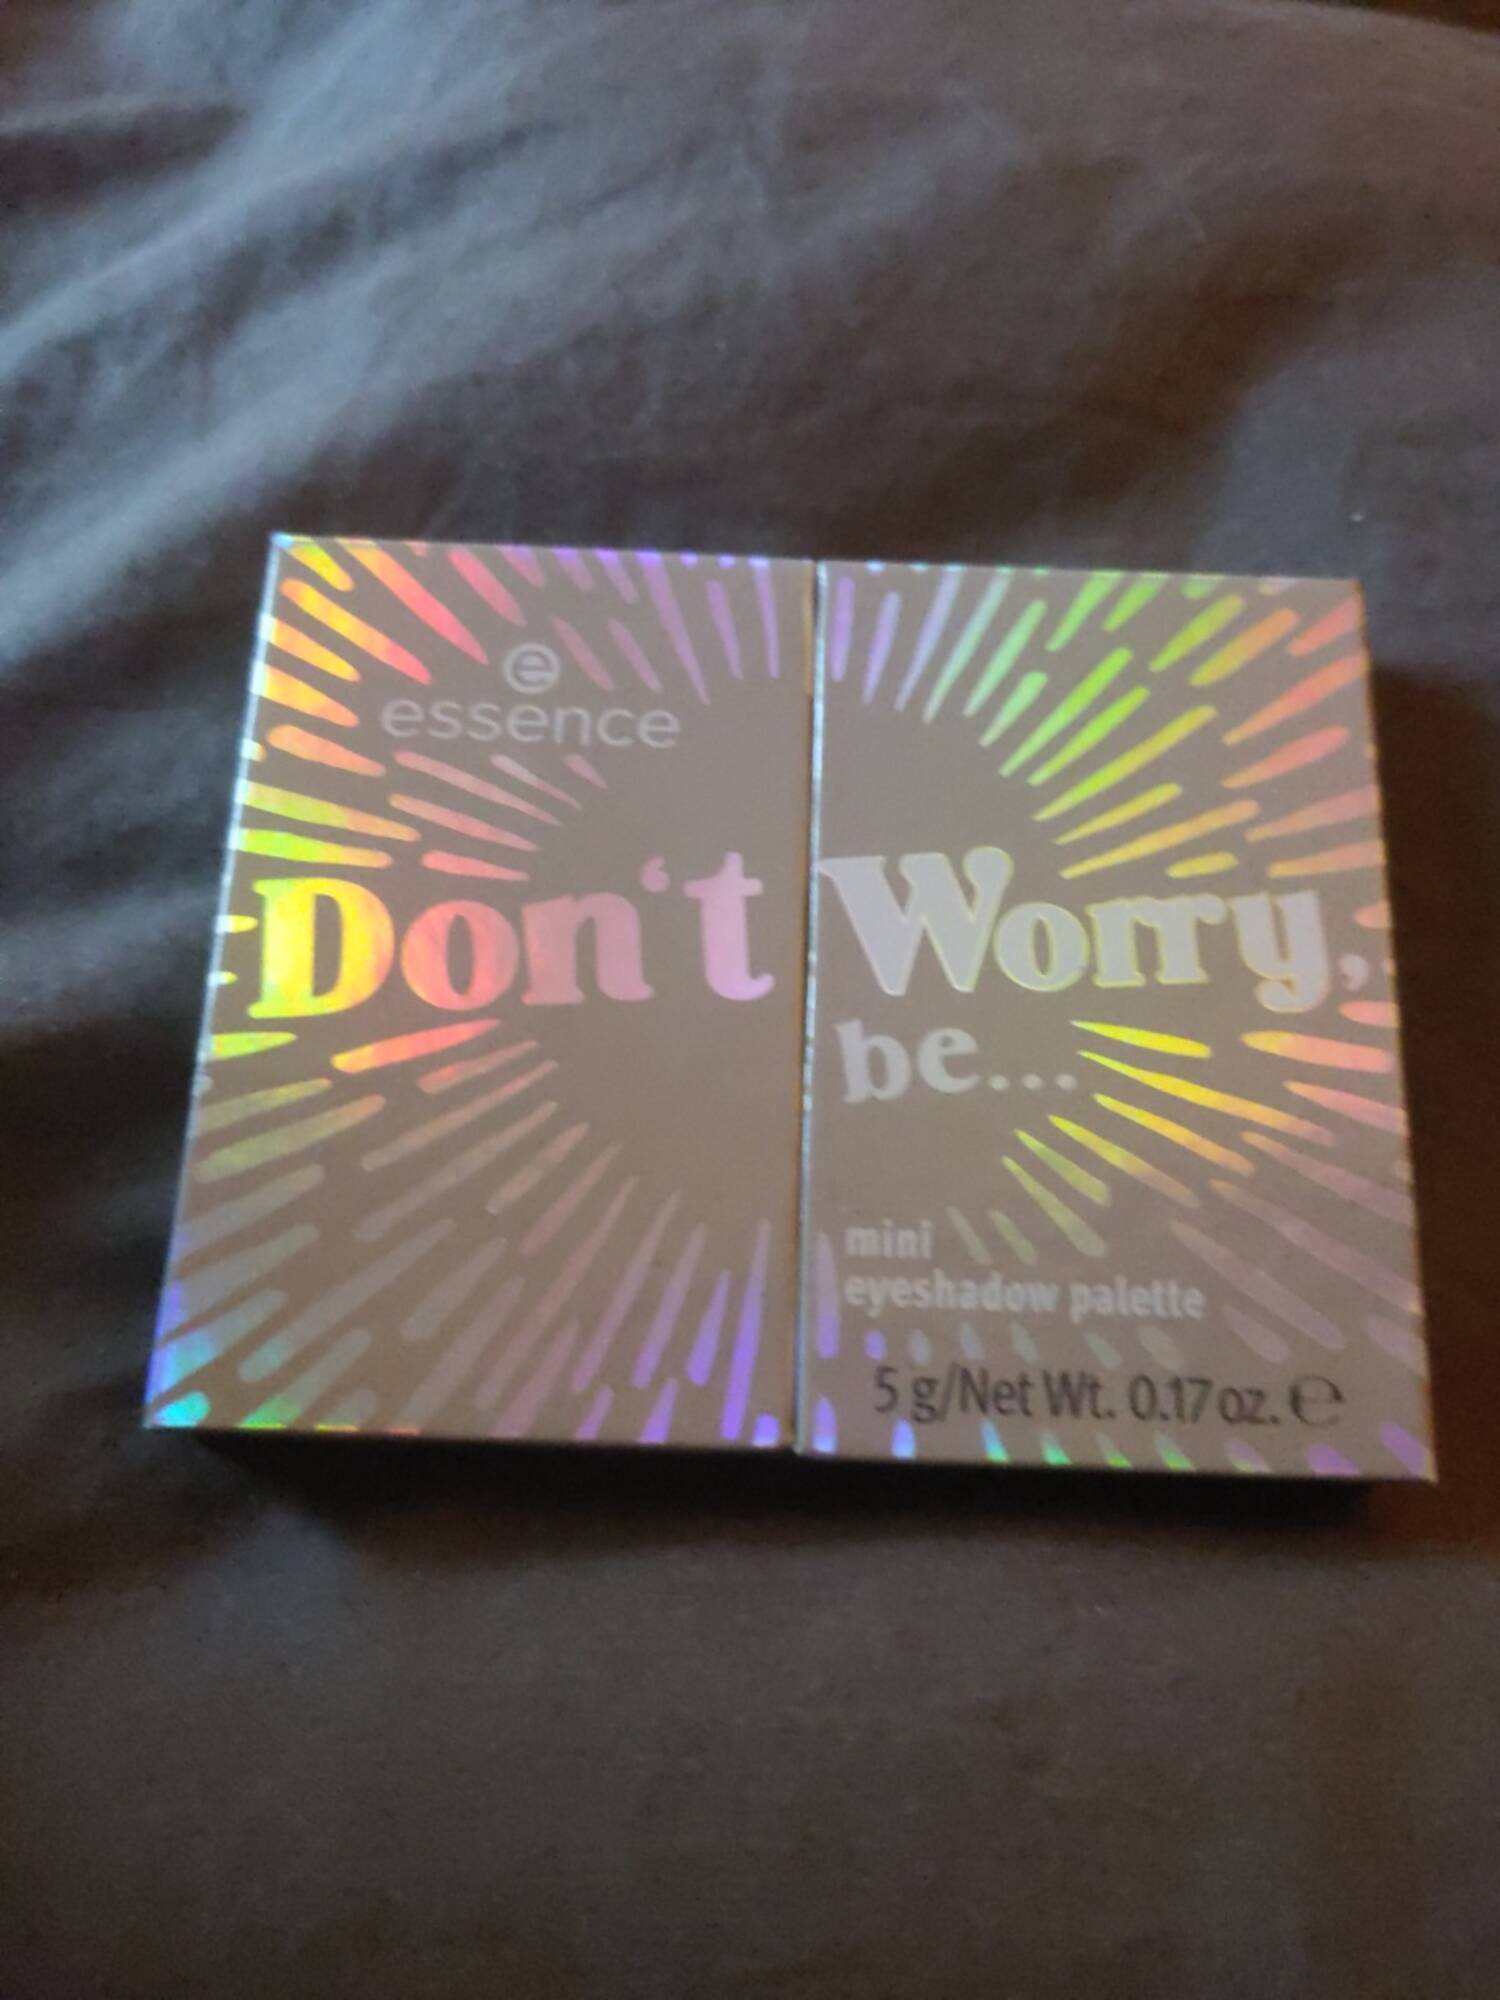 ESSENCE - Dont worry be... - Mini eyeshadow palette